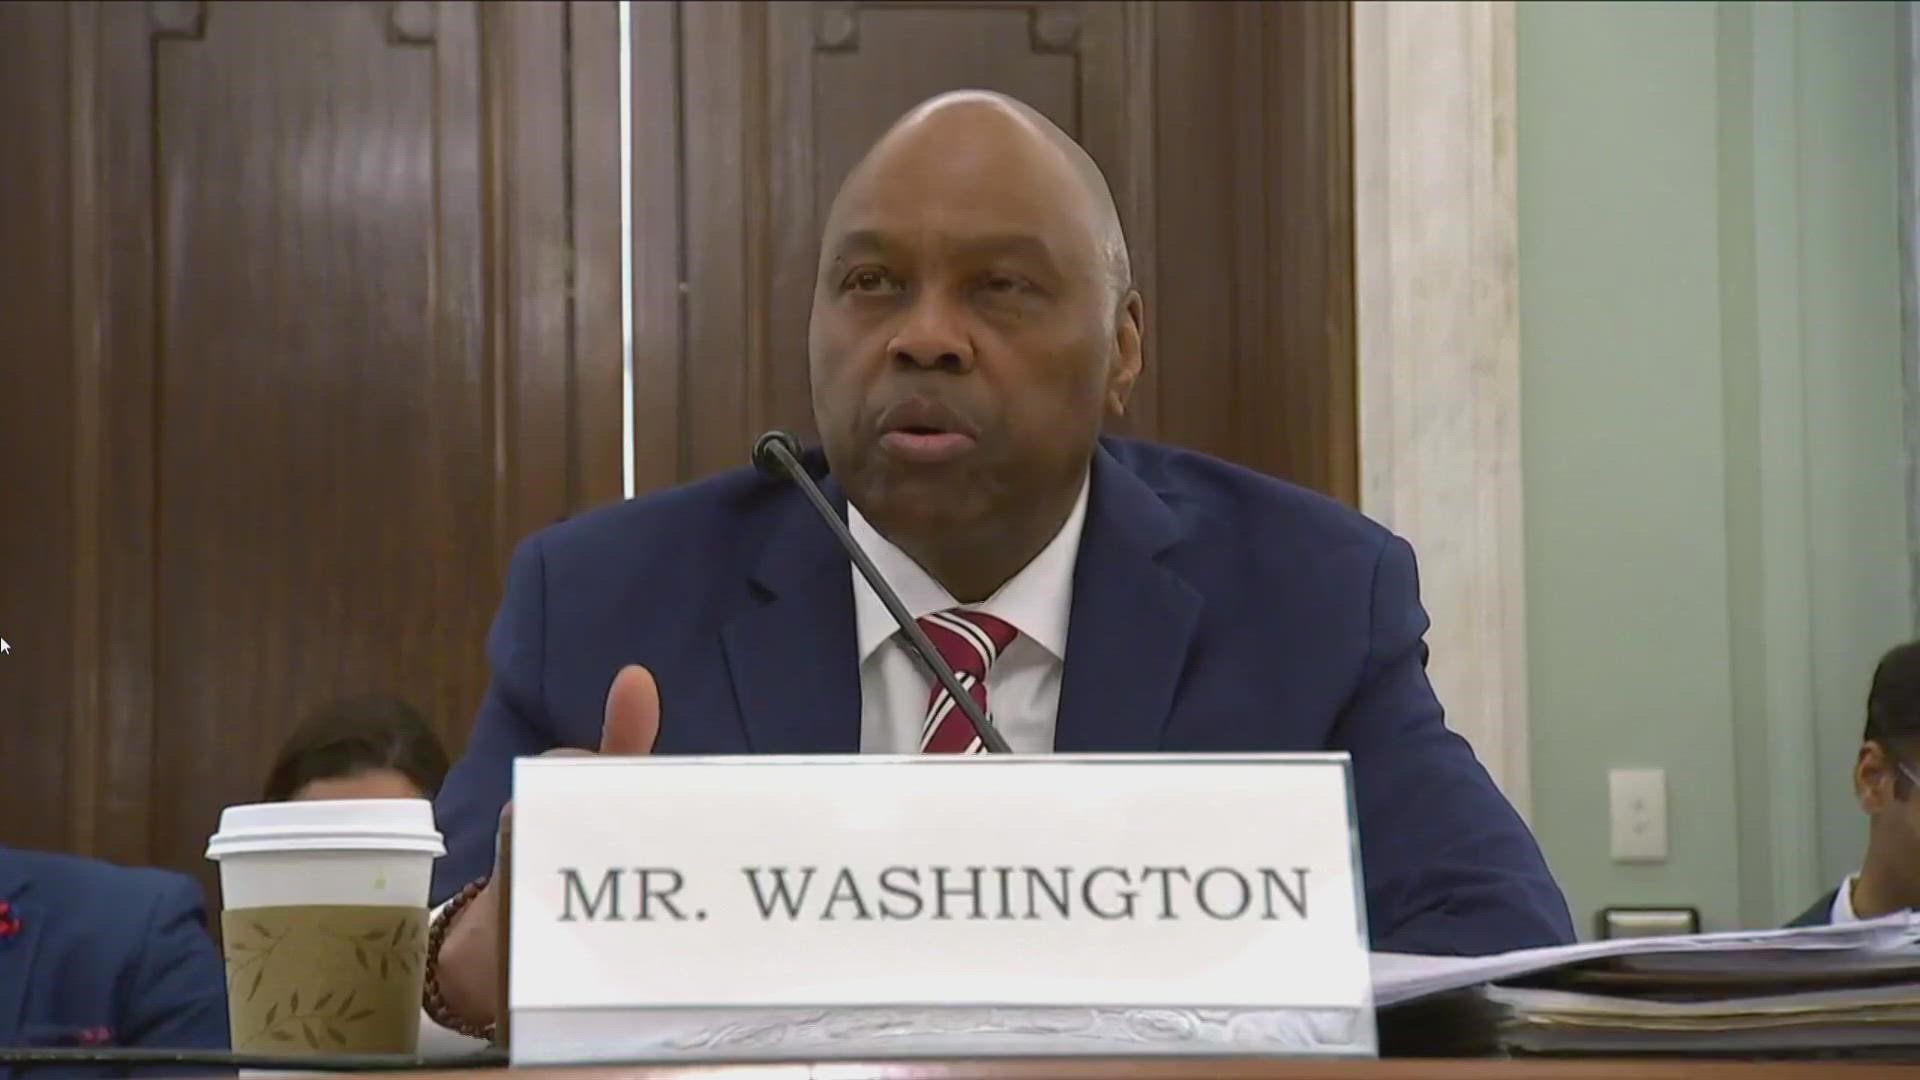 Phillip Washington told the Senate Commerce Committee that safety will be his top priority, and he will “leave the FAA better than I found it.”